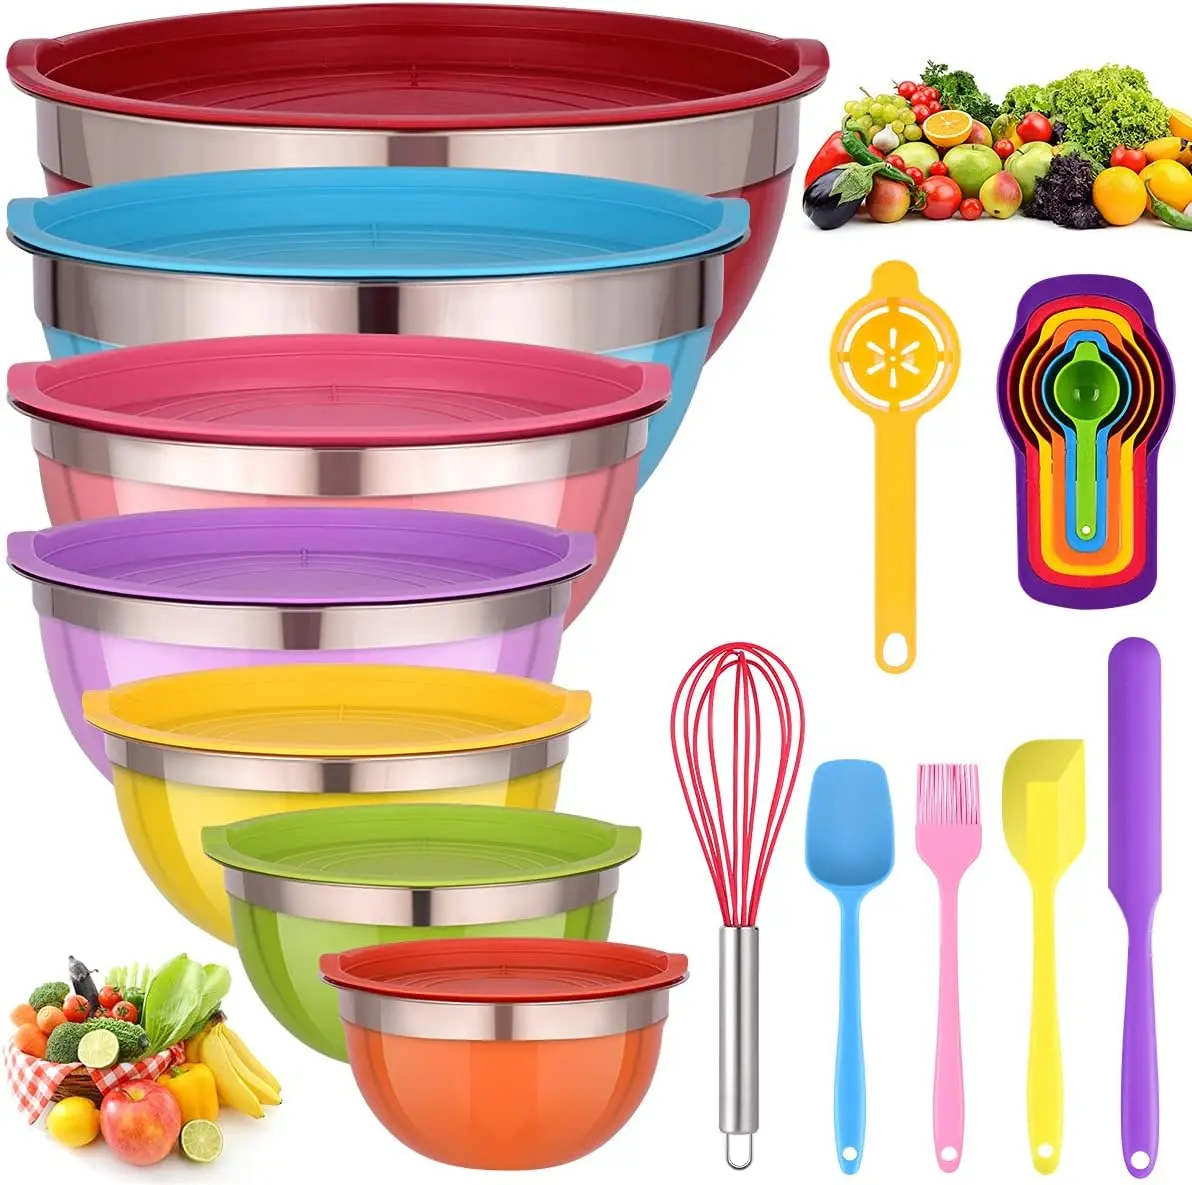 

Bowls with Lids for Kitchen - 26 PCS Stainless Steel Nesting Colorful Mixing Bowls Set for Baking,Mixing,Serving & Prepping, Ram